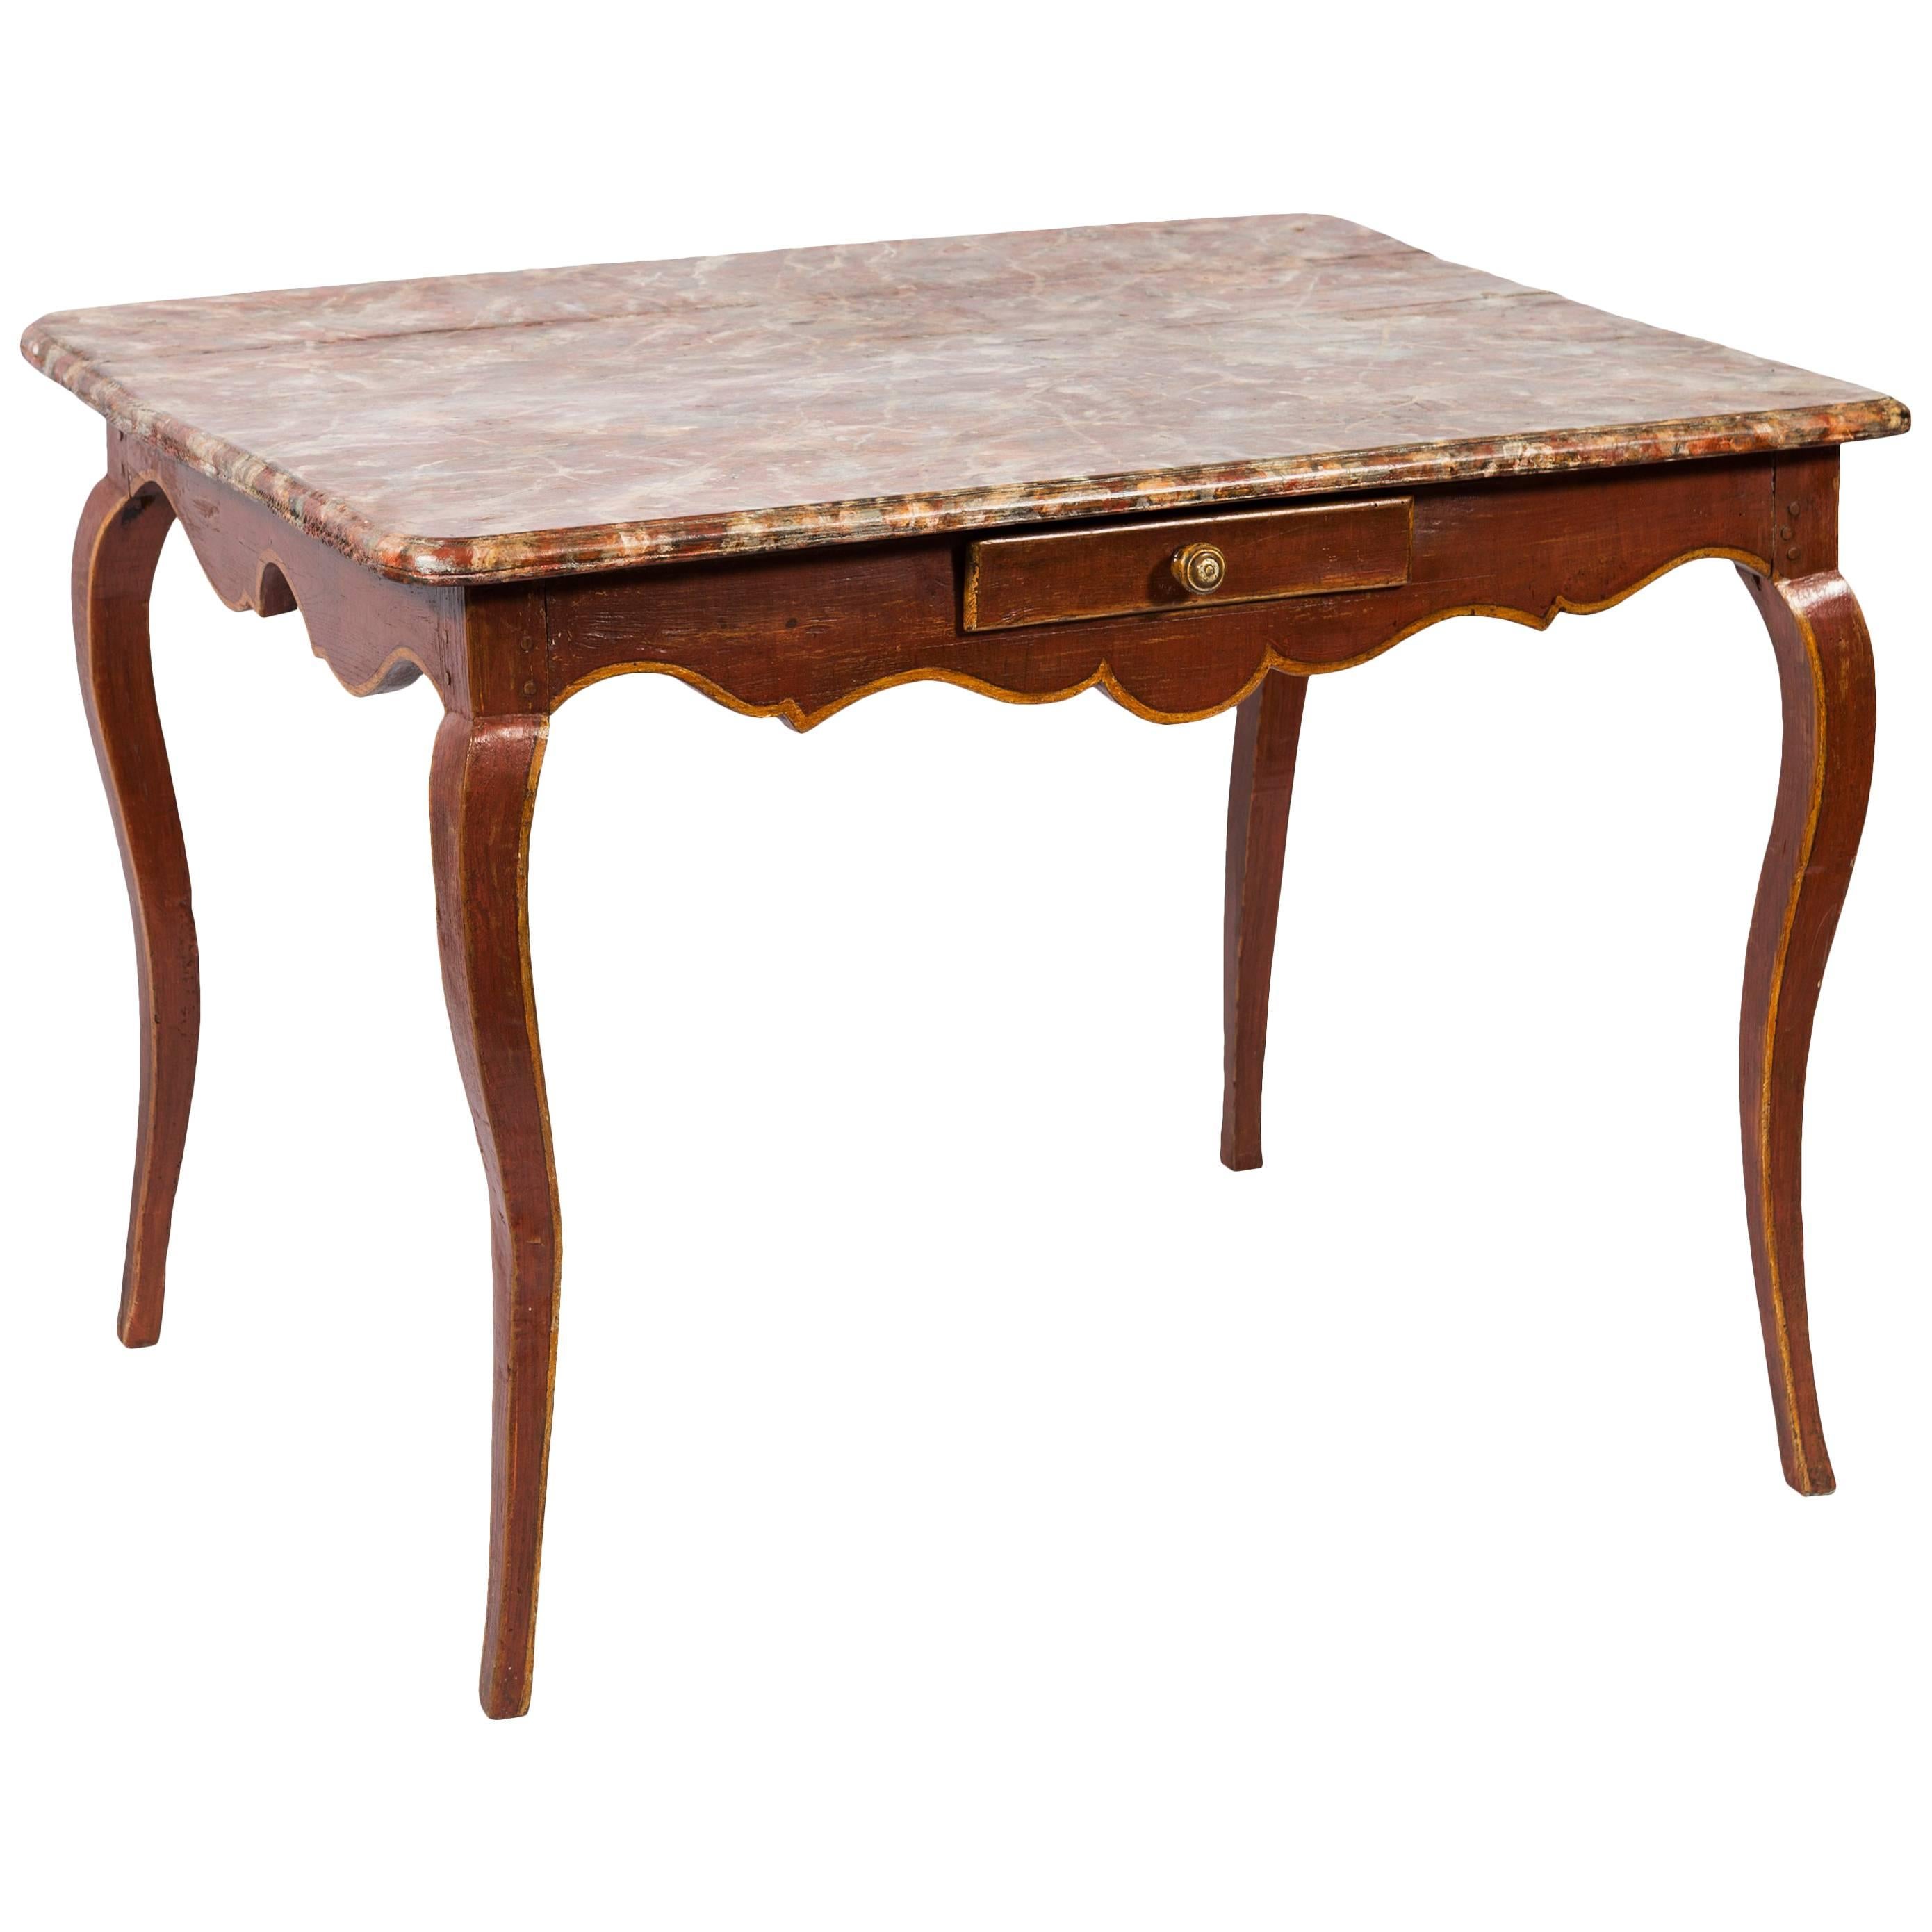 19th Century French Painted Wood Table with Faux Marble Top For Sale